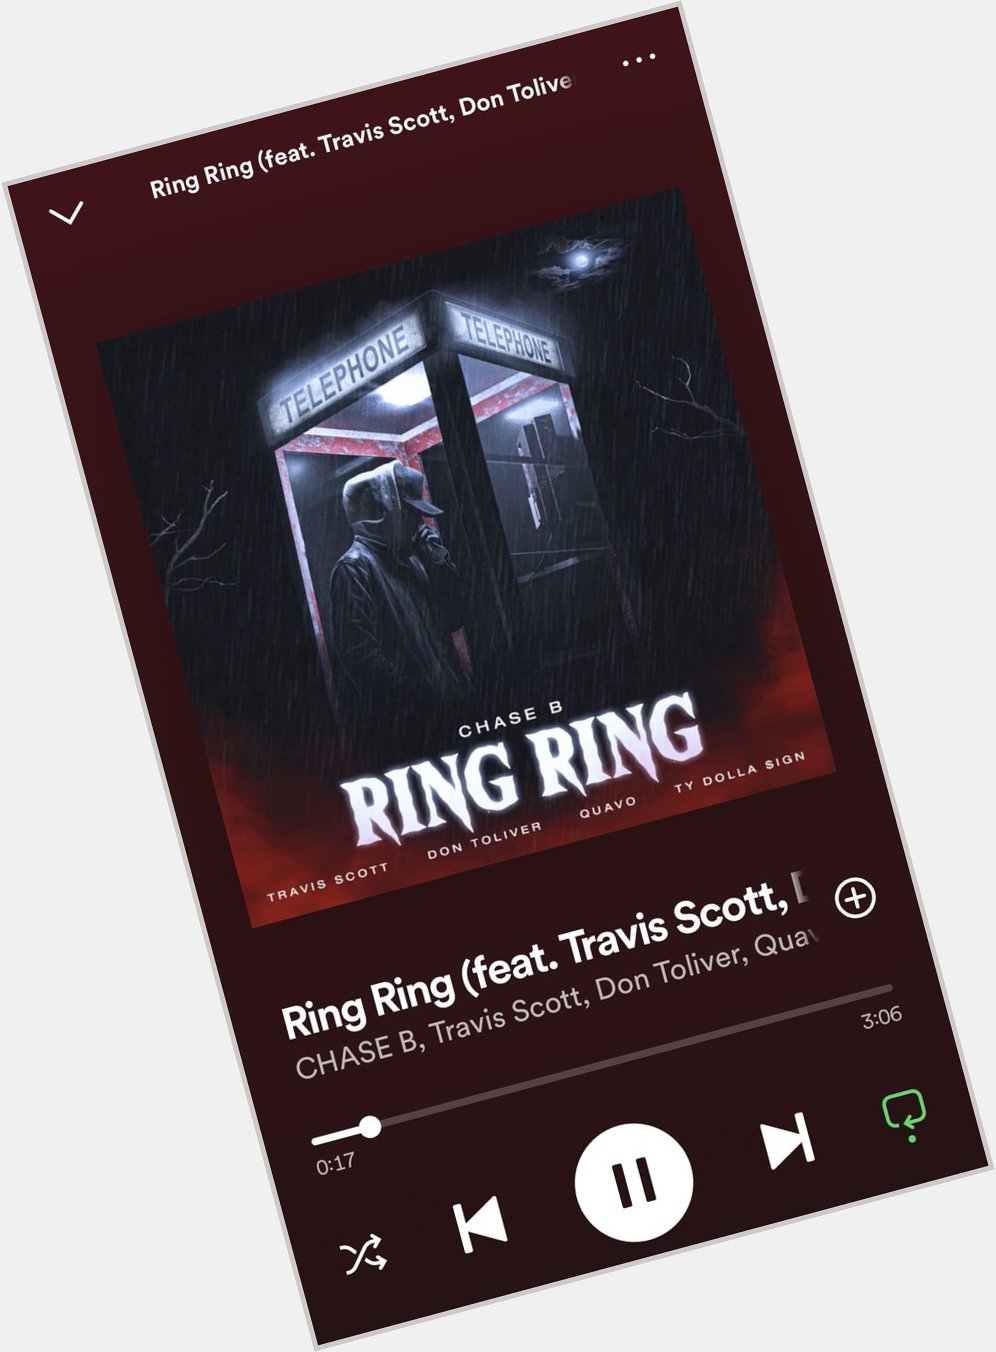 Chase B - Ring Ring (ft. Travis Scott, Don Toliver, Quavo & TY Dolla Sing) OUT NOW!!!!!

Happy bday      